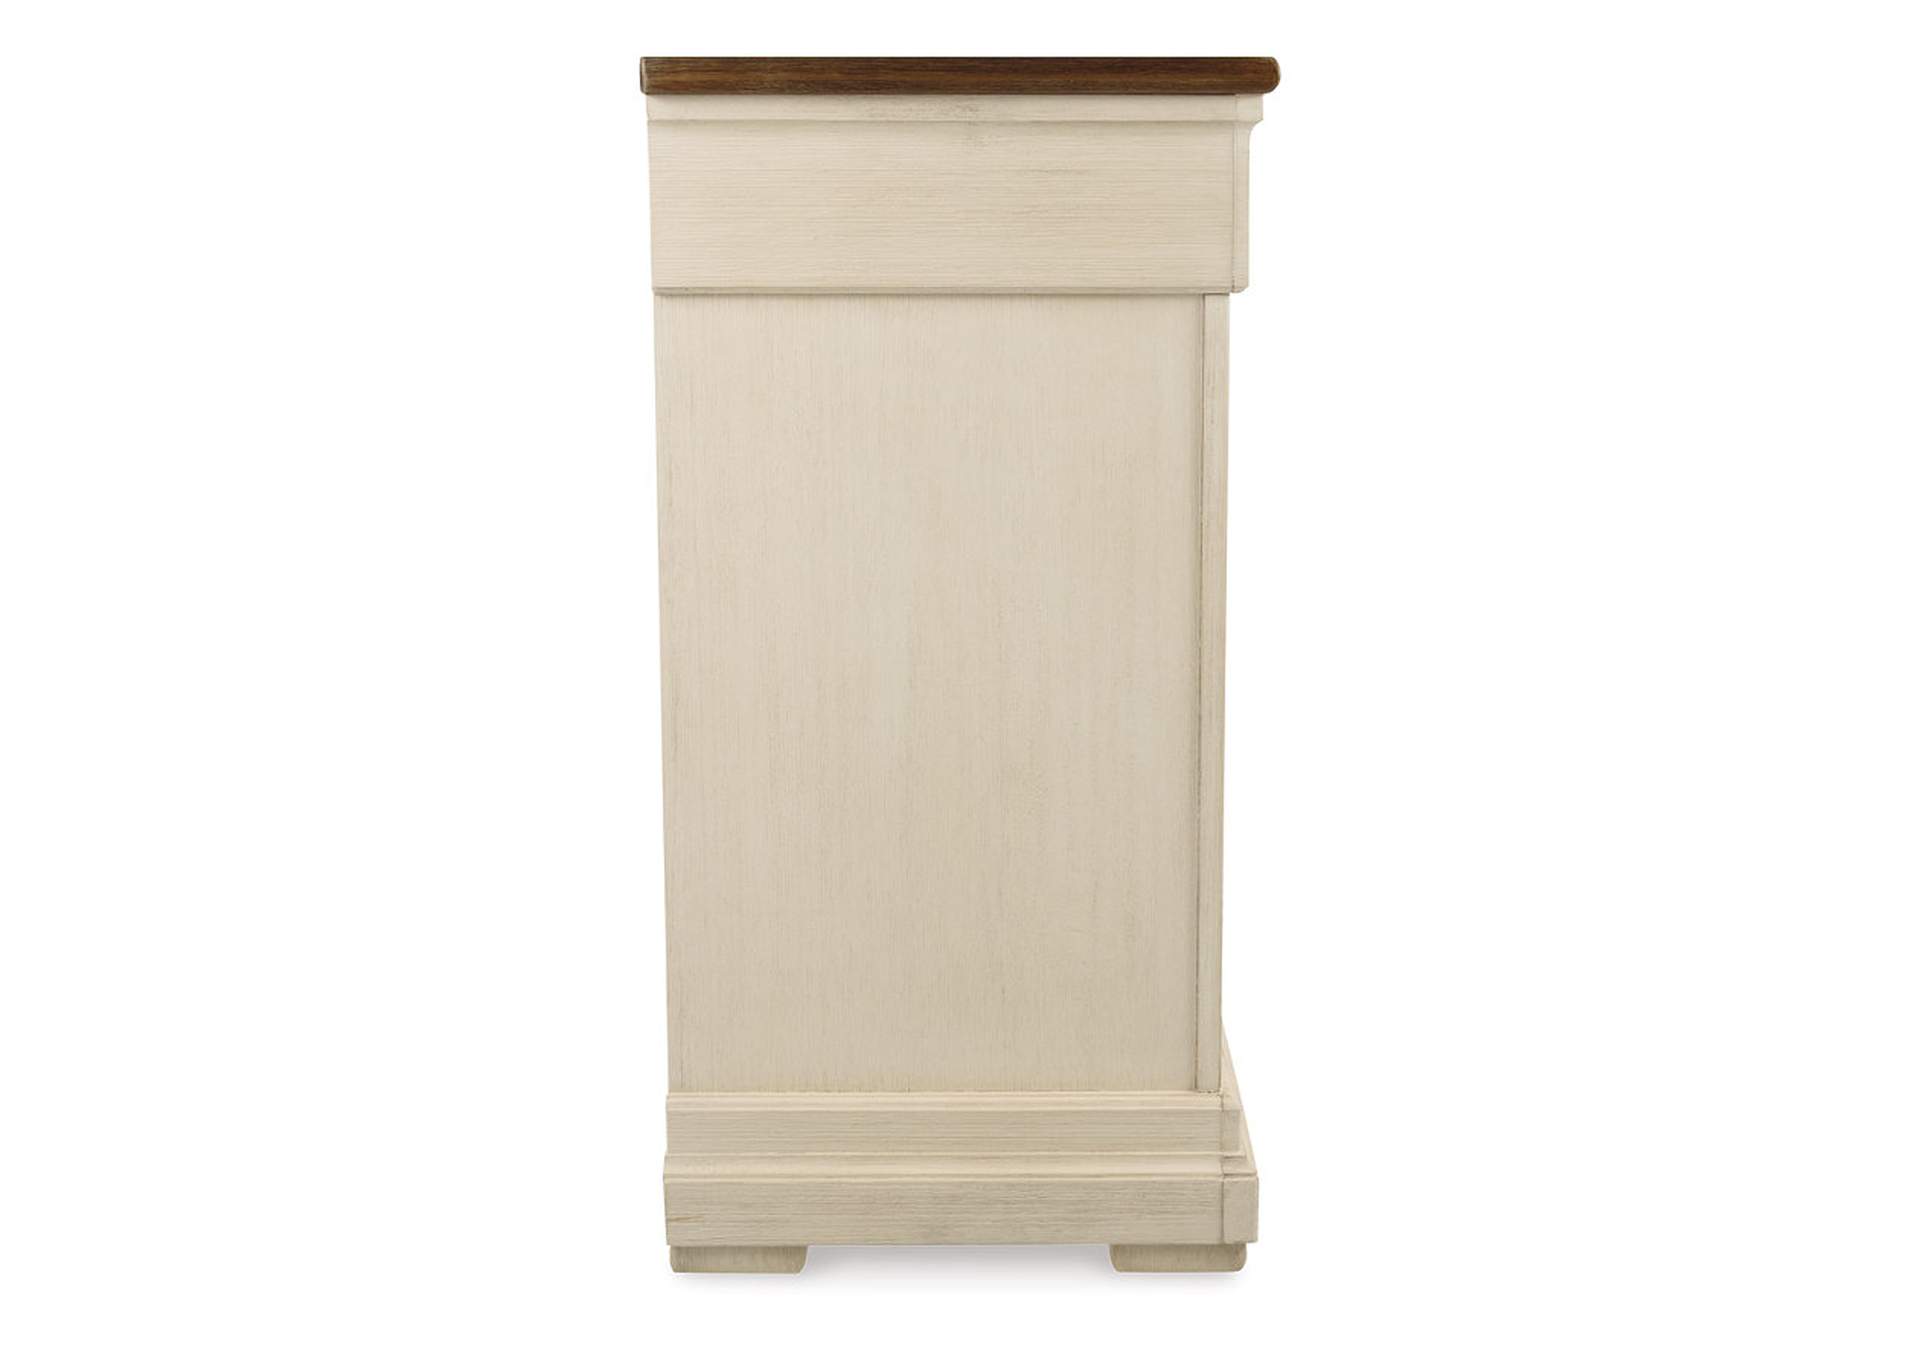 Bolanburg Queen Panel Bed, Dresser and Nightstand,Signature Design By Ashley